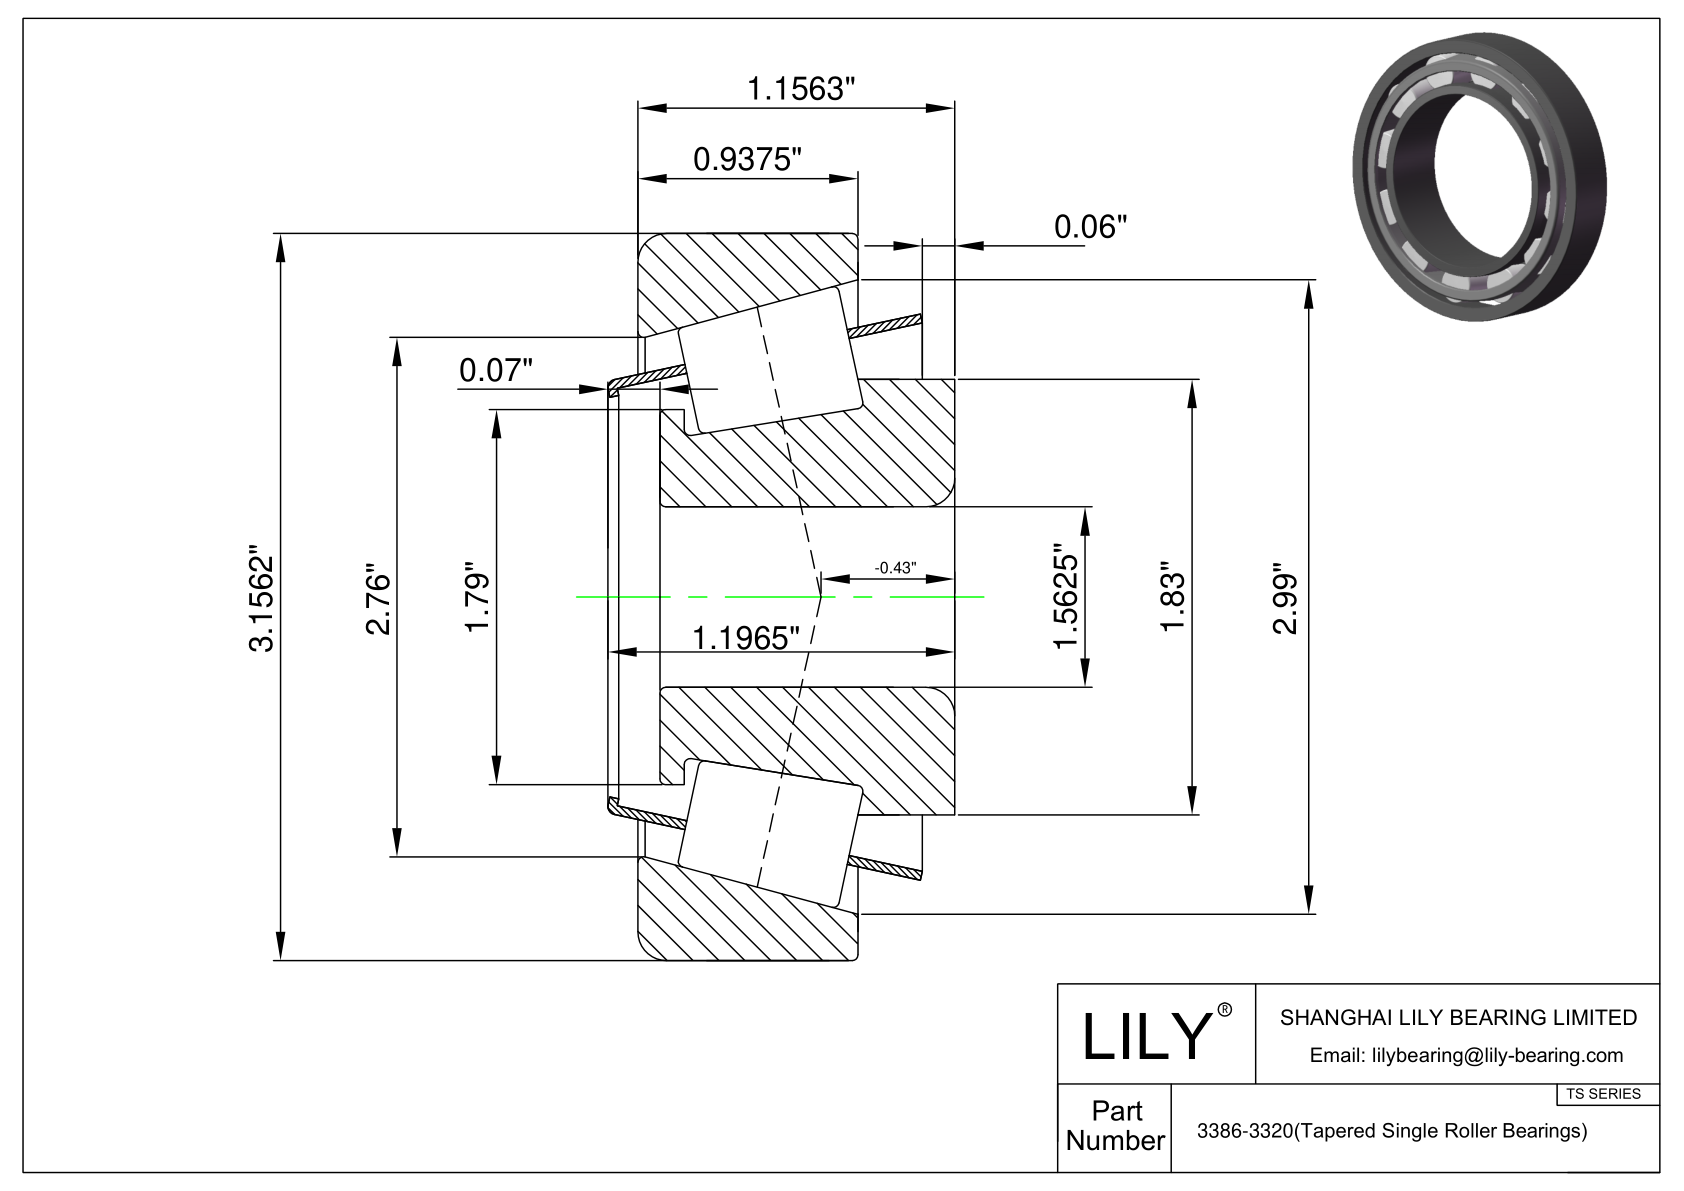 3386-3320 TS (Tapered Single Roller Bearings) (Imperial) cad drawing